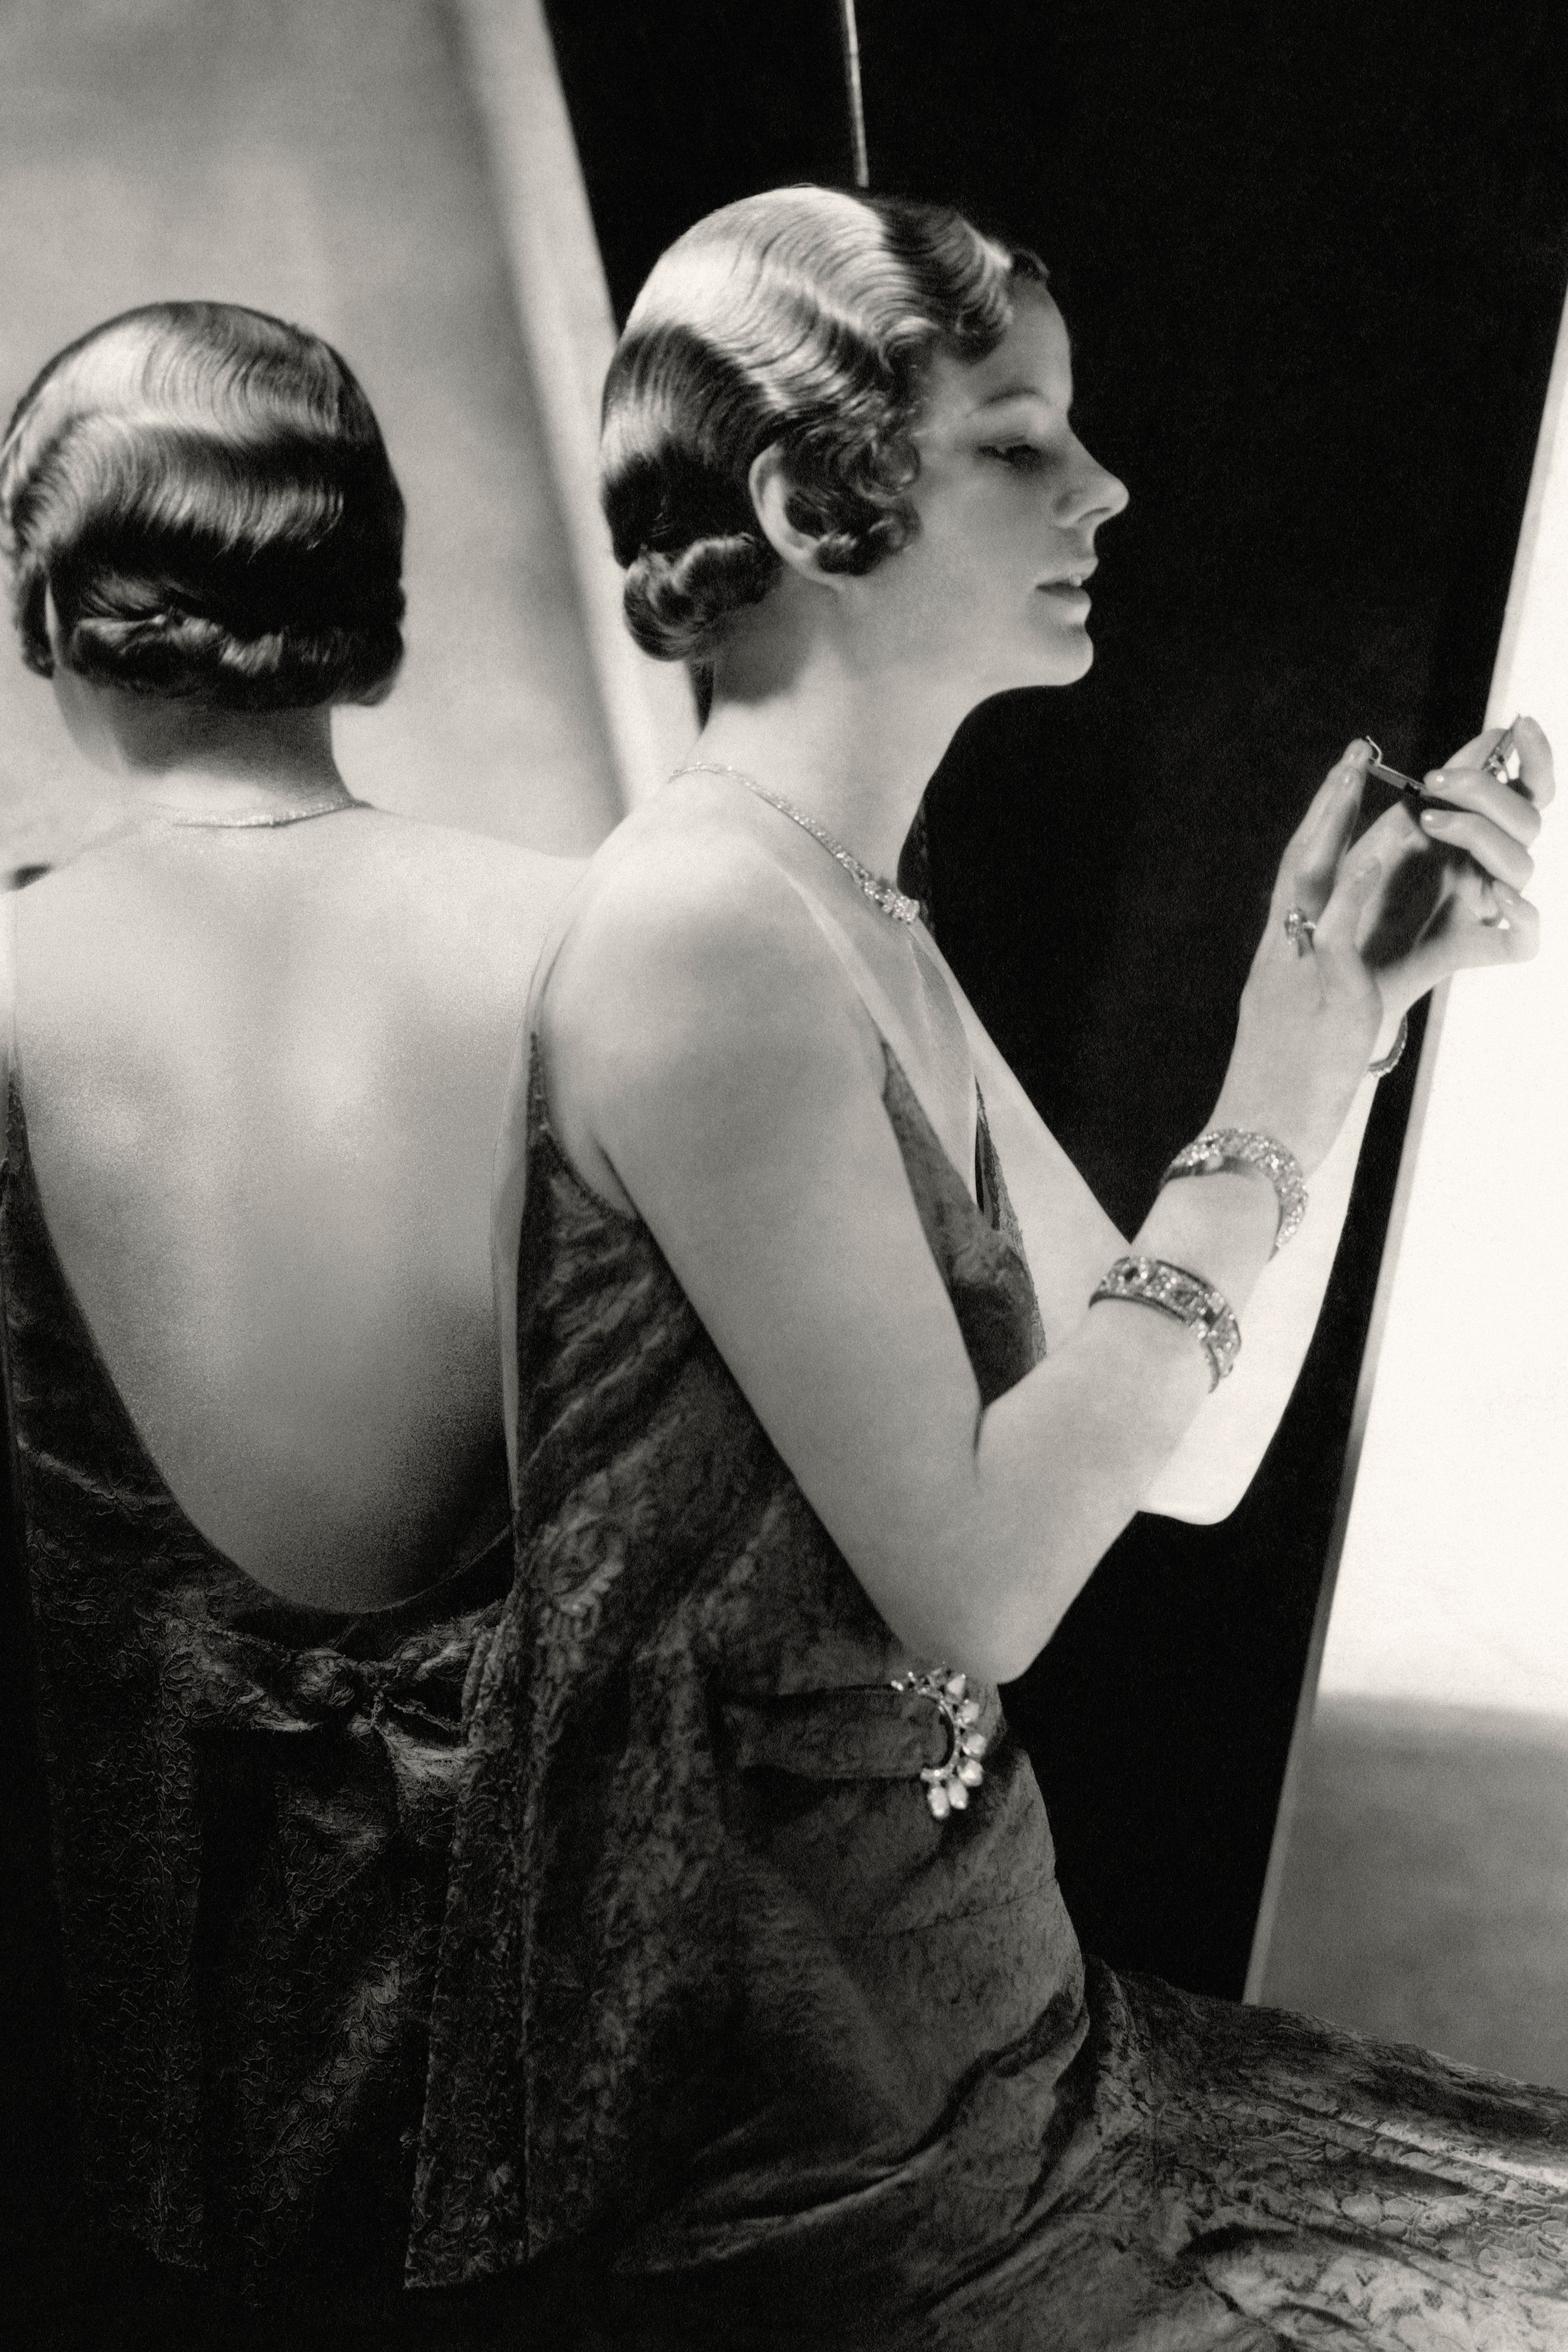 Model Hannah Lee Sherman wears a lace black Chanel dress during a 1930 photoshoot